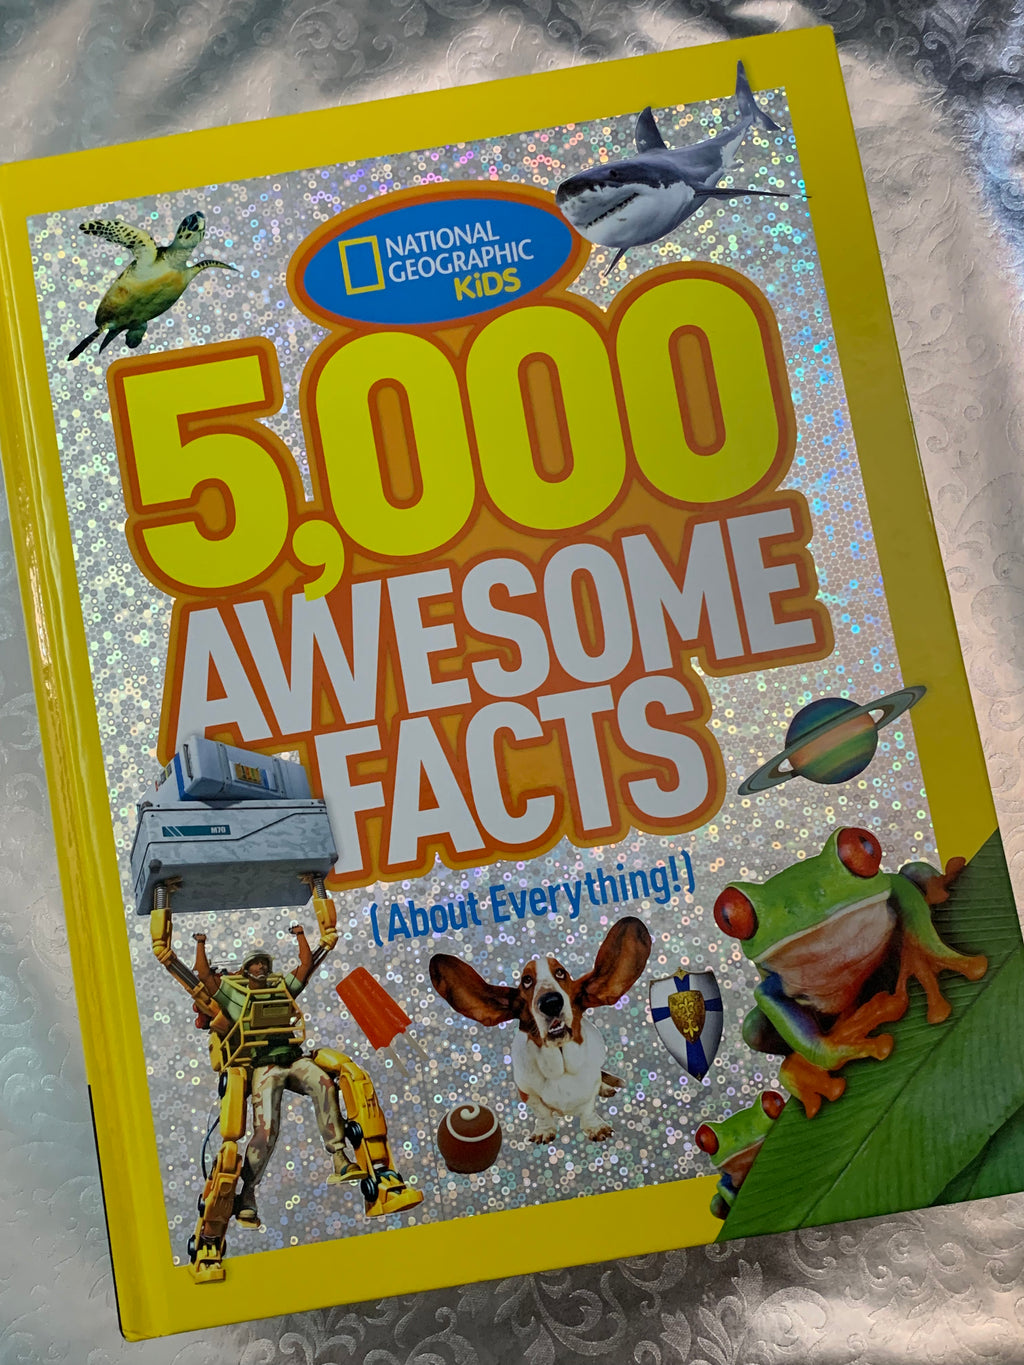 5,000 Awesome Facts (About Everything)- National Geographic Kids